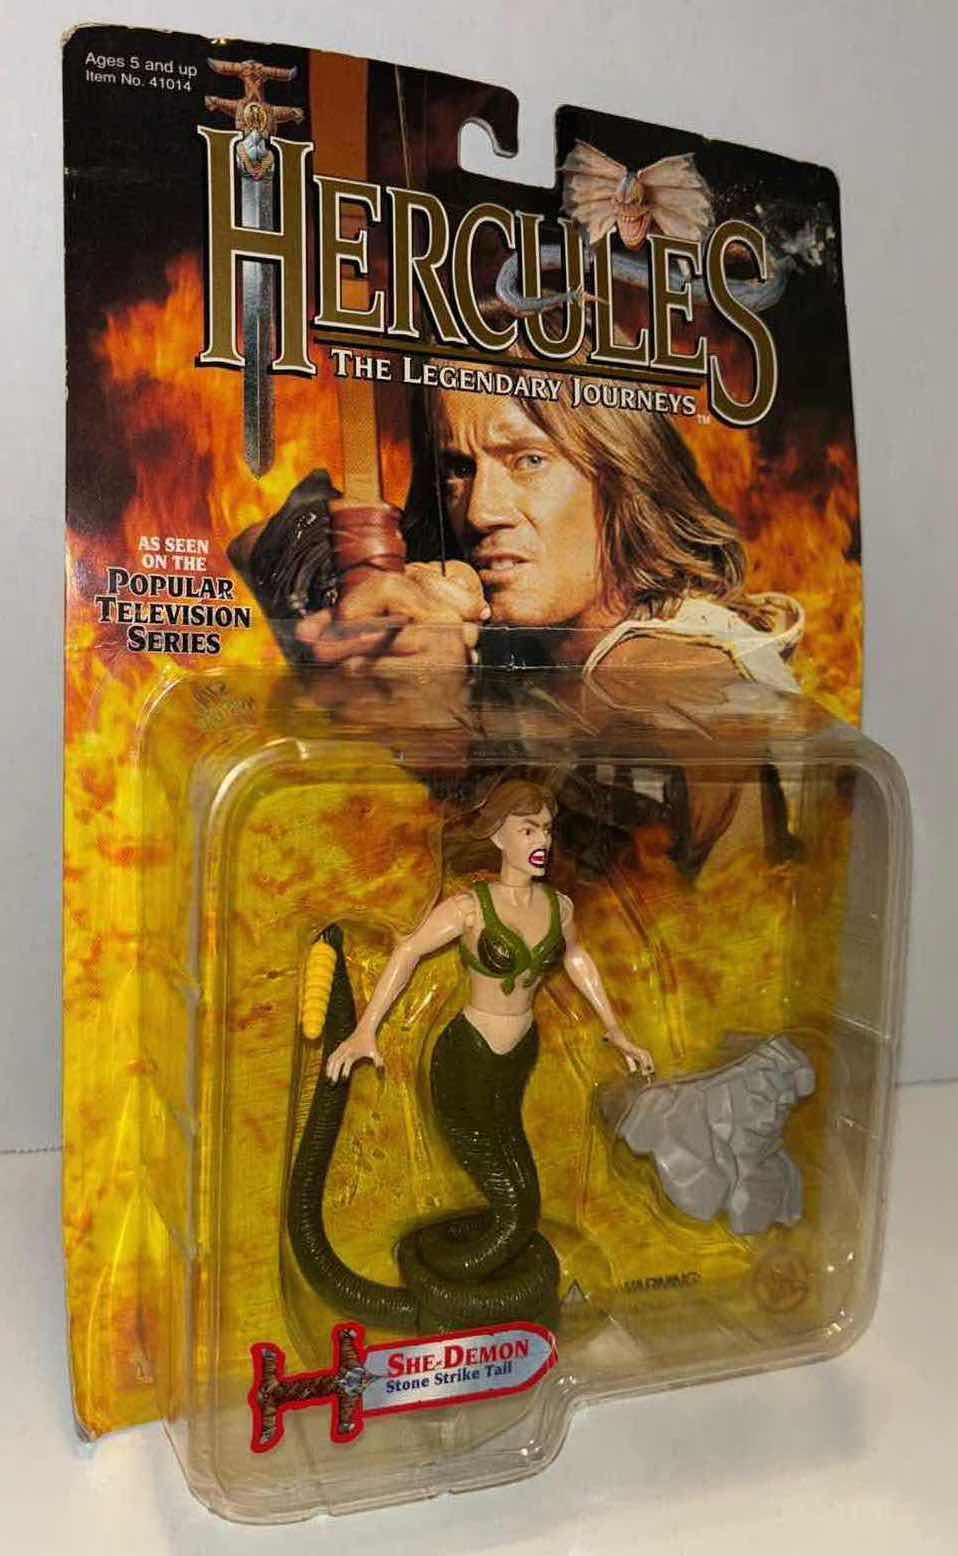 Photo 1 of NEW 1996 TOY BIZ HERCULES THE LEGENDARY JOURNEYS ACTION FIGURE & ACCESSORIES, “SHE-DEMON” STONE STRIKE TAIL